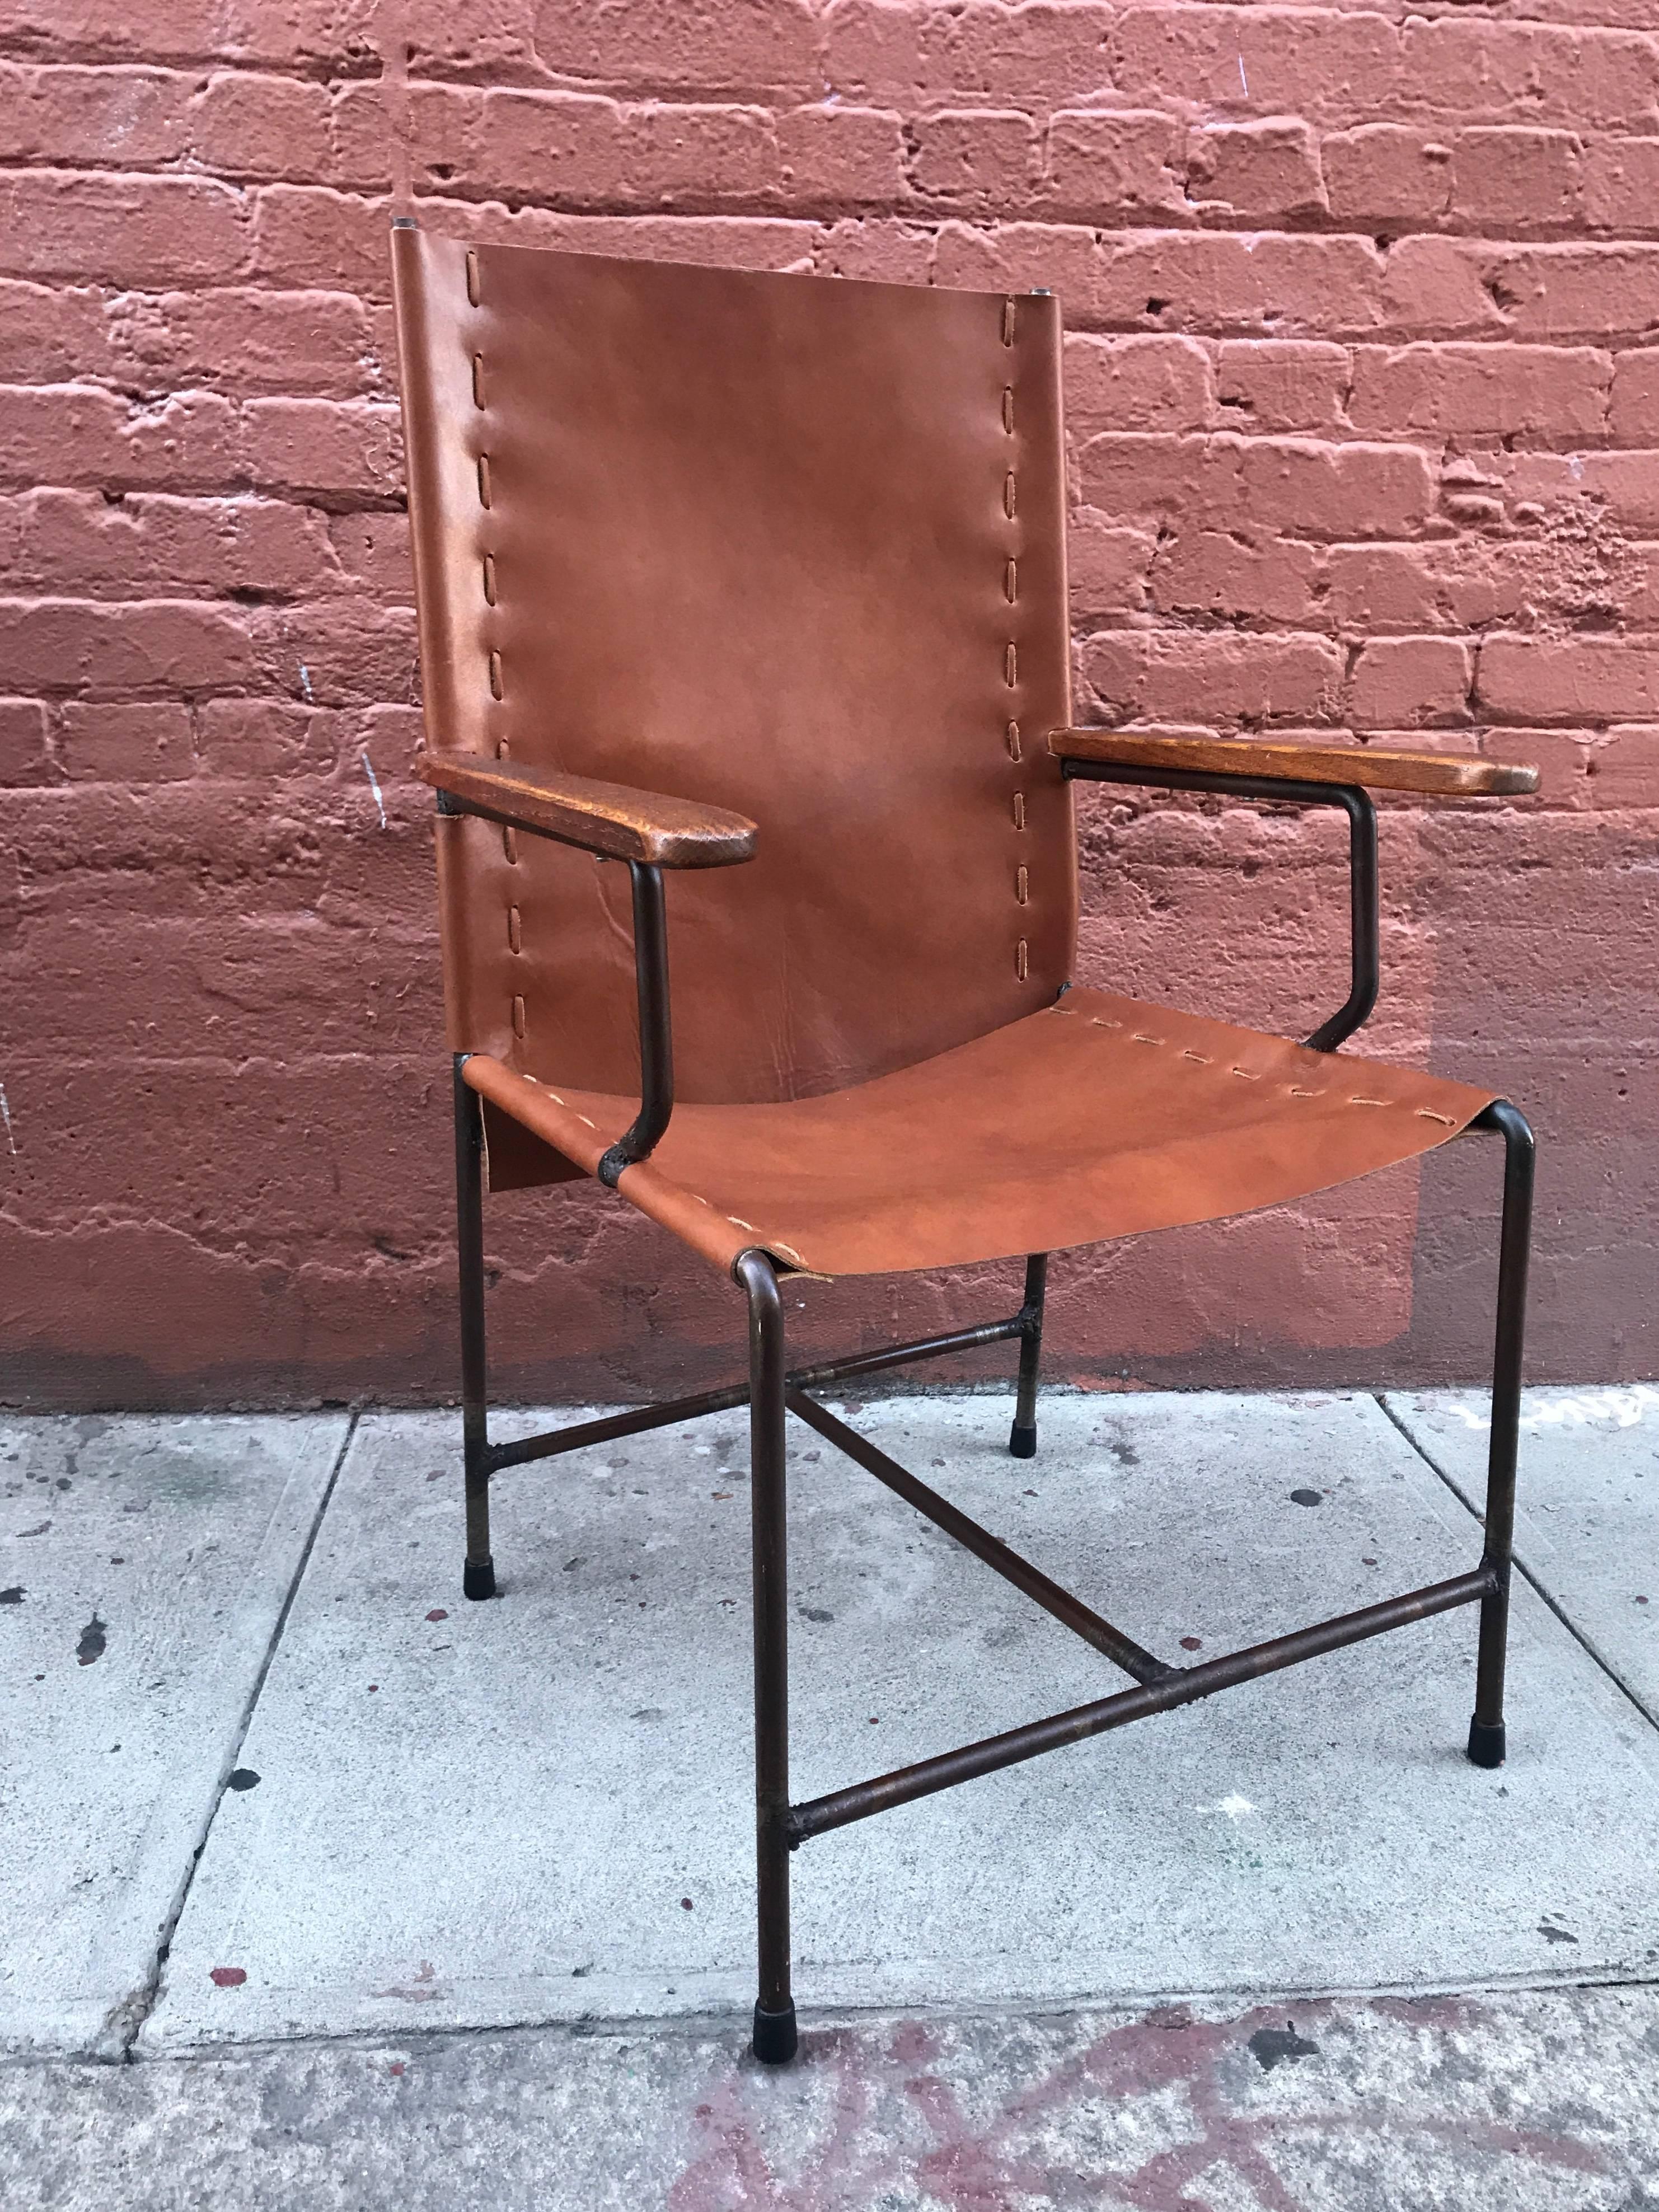 Mid-20th Century Pair of Mexican Modern Armchairs in Iron and Leather, circa 1950s For Sale